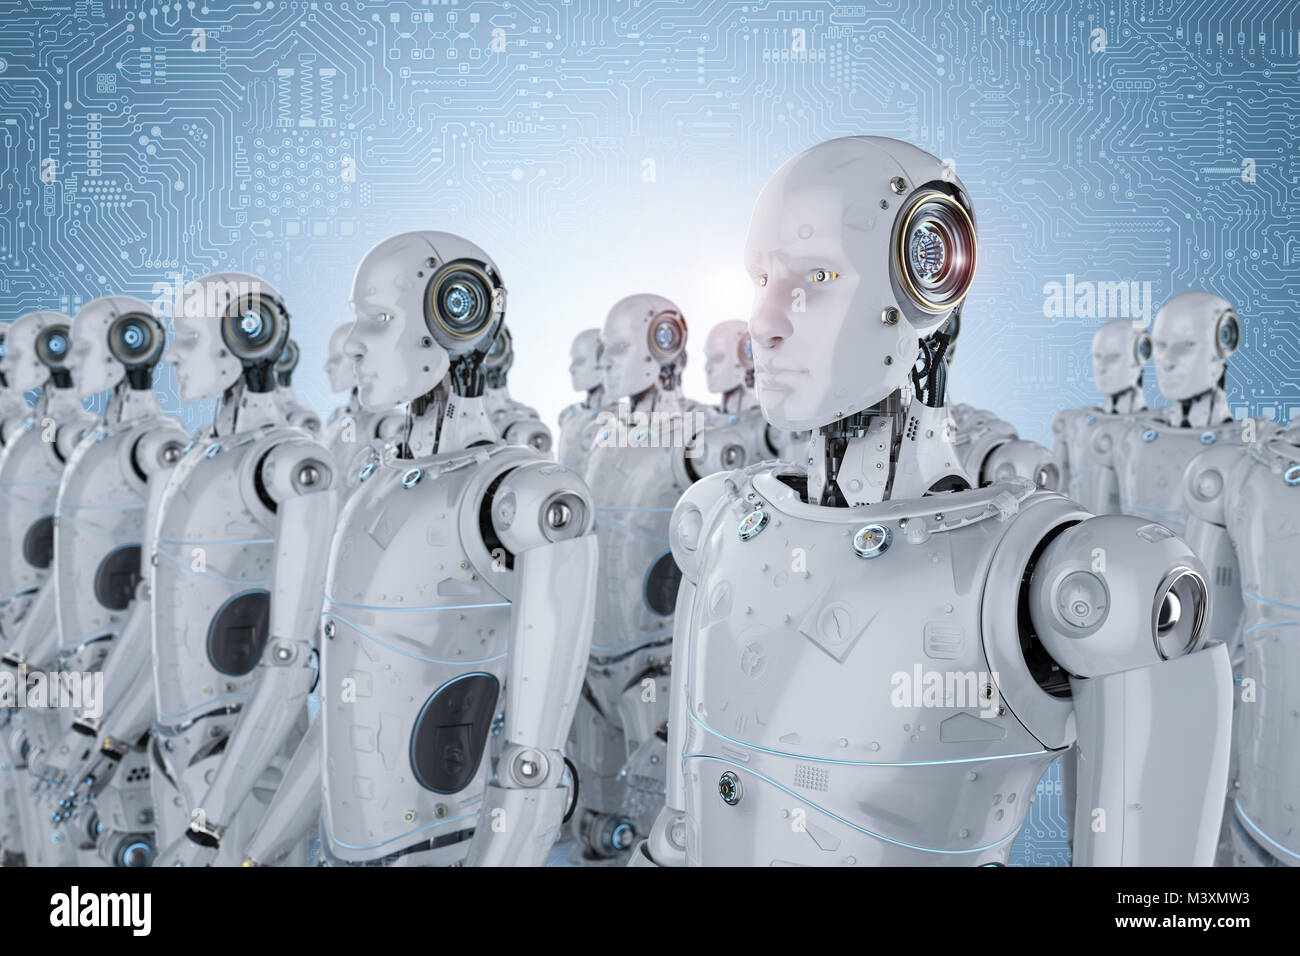 3d rendering group of humanoid robots in a row Stock Photo